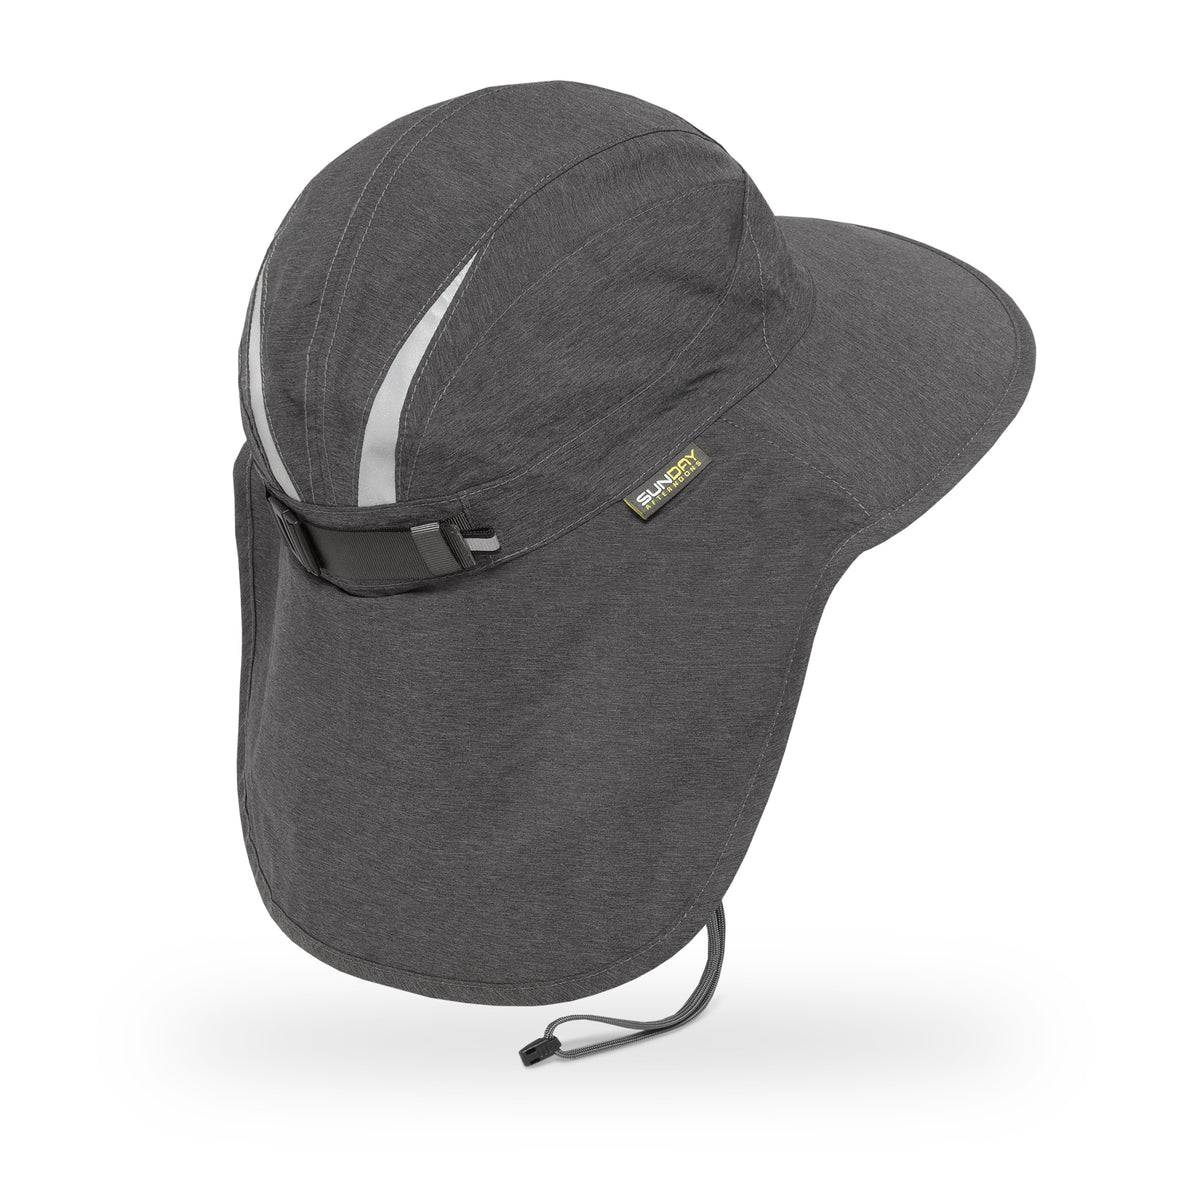 Sunday Afternoons Ultra Adventure Storm Hat (Taupe, S/M)